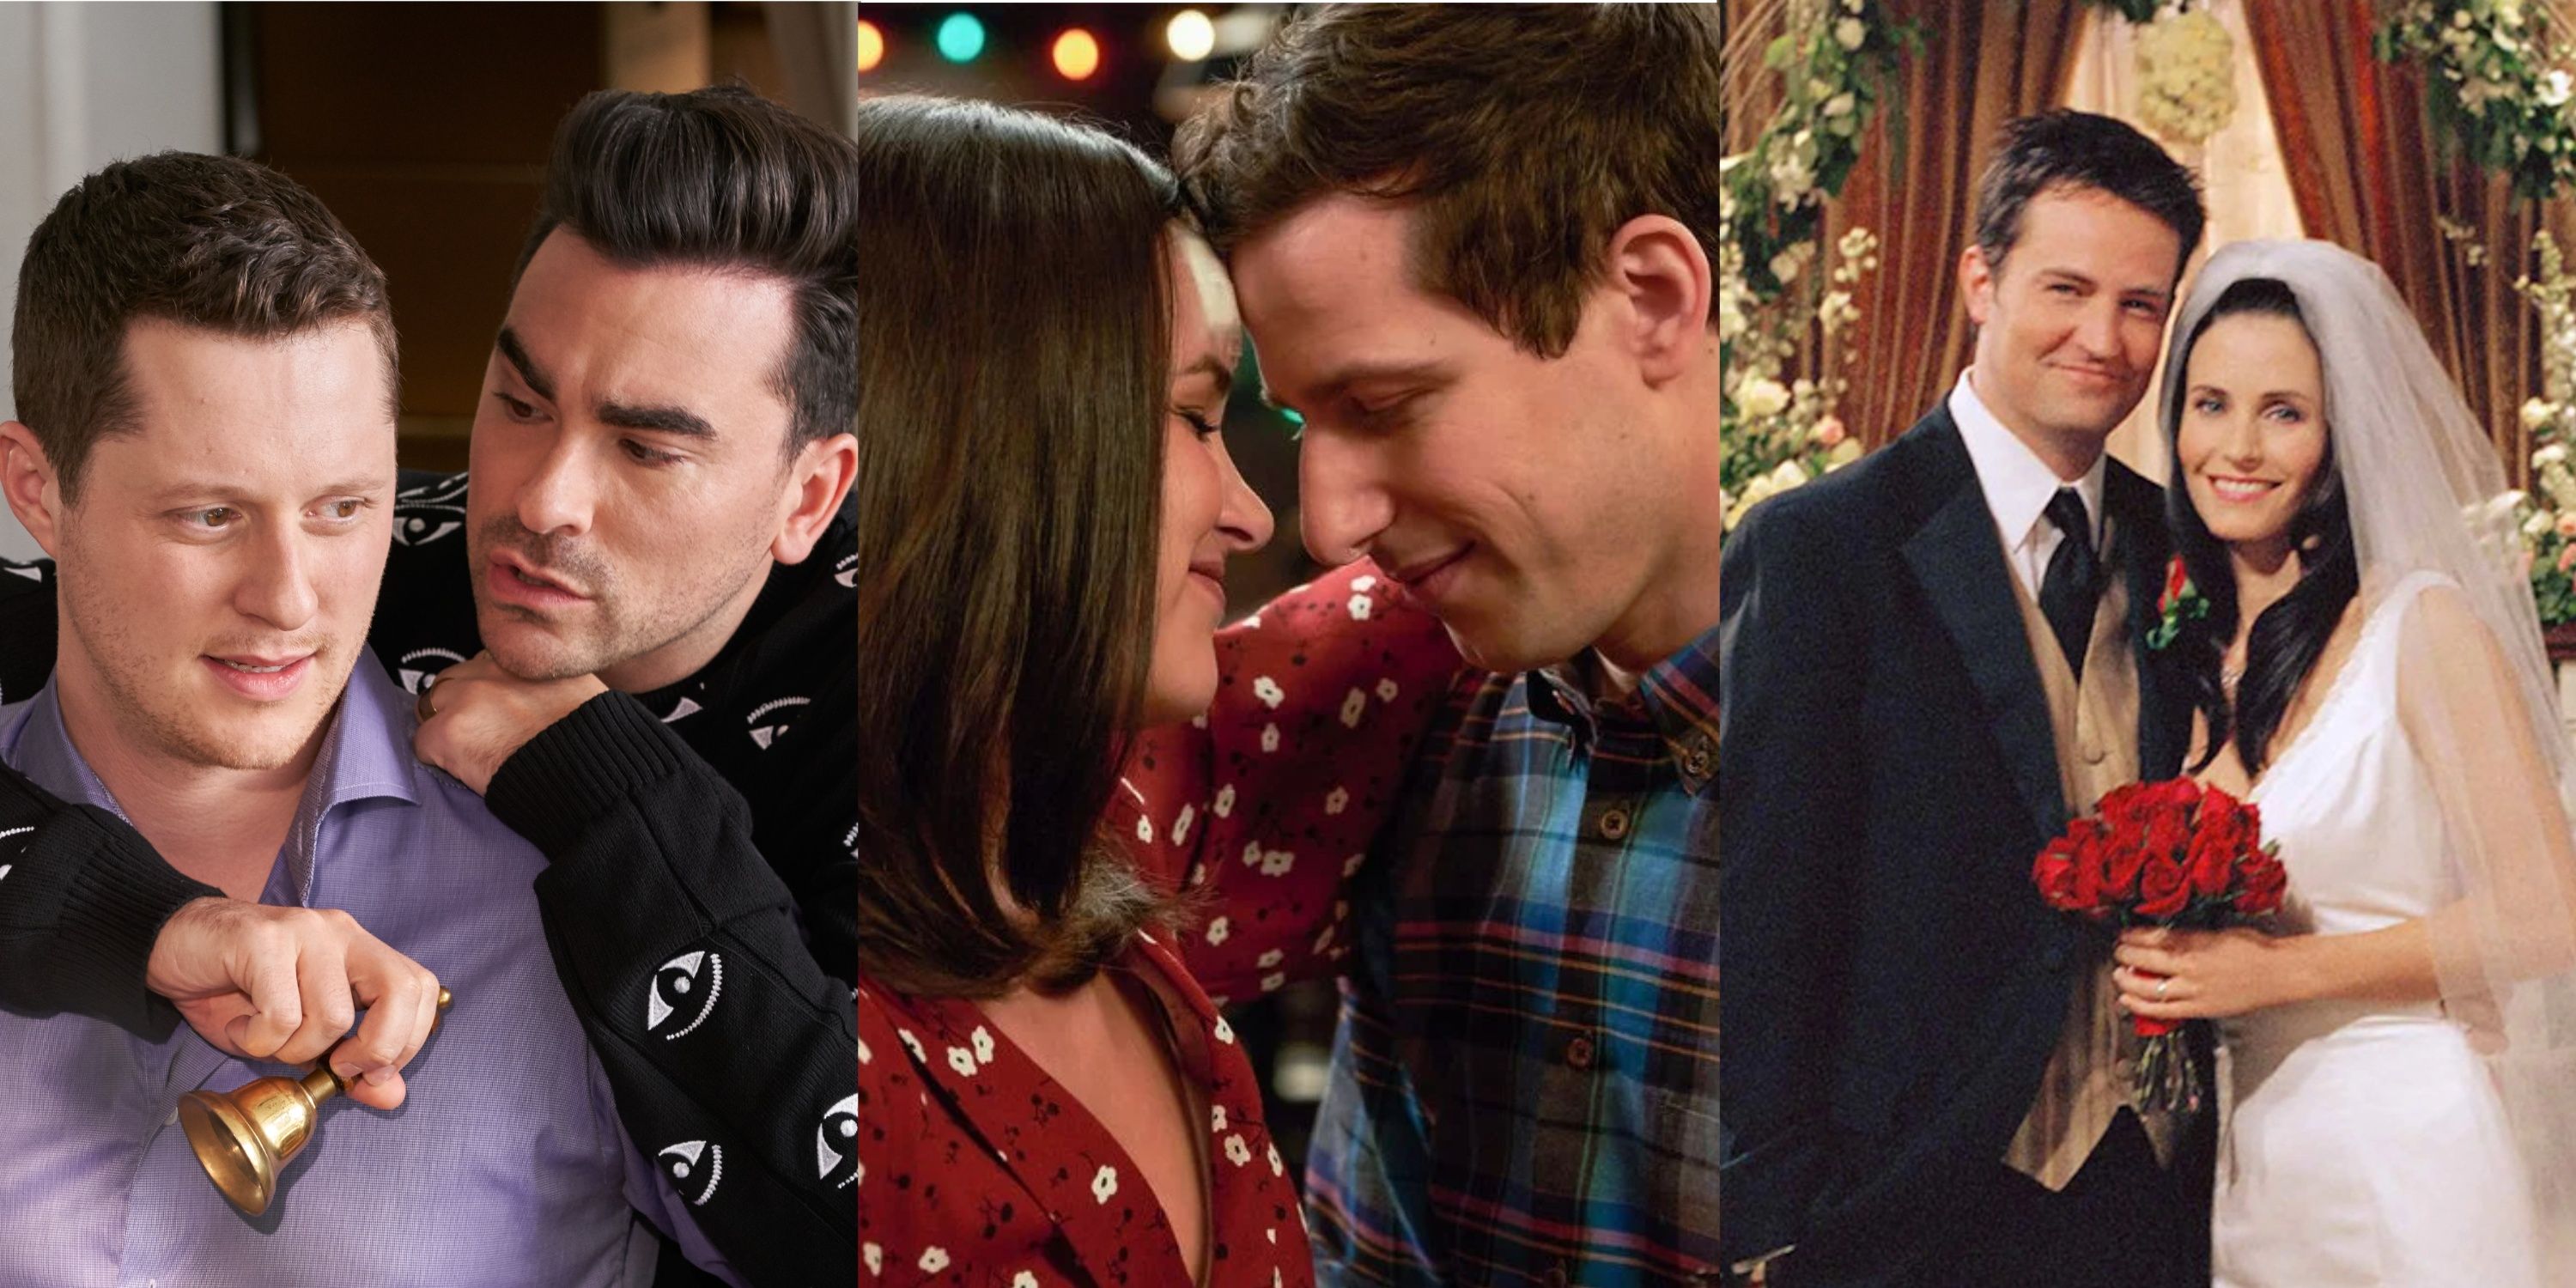 David and Patrick in Schitt's Creek, Jake and Amy embrace in Brooklyn Nine Nine, Monica and Chandler on their wedding day in Friends.